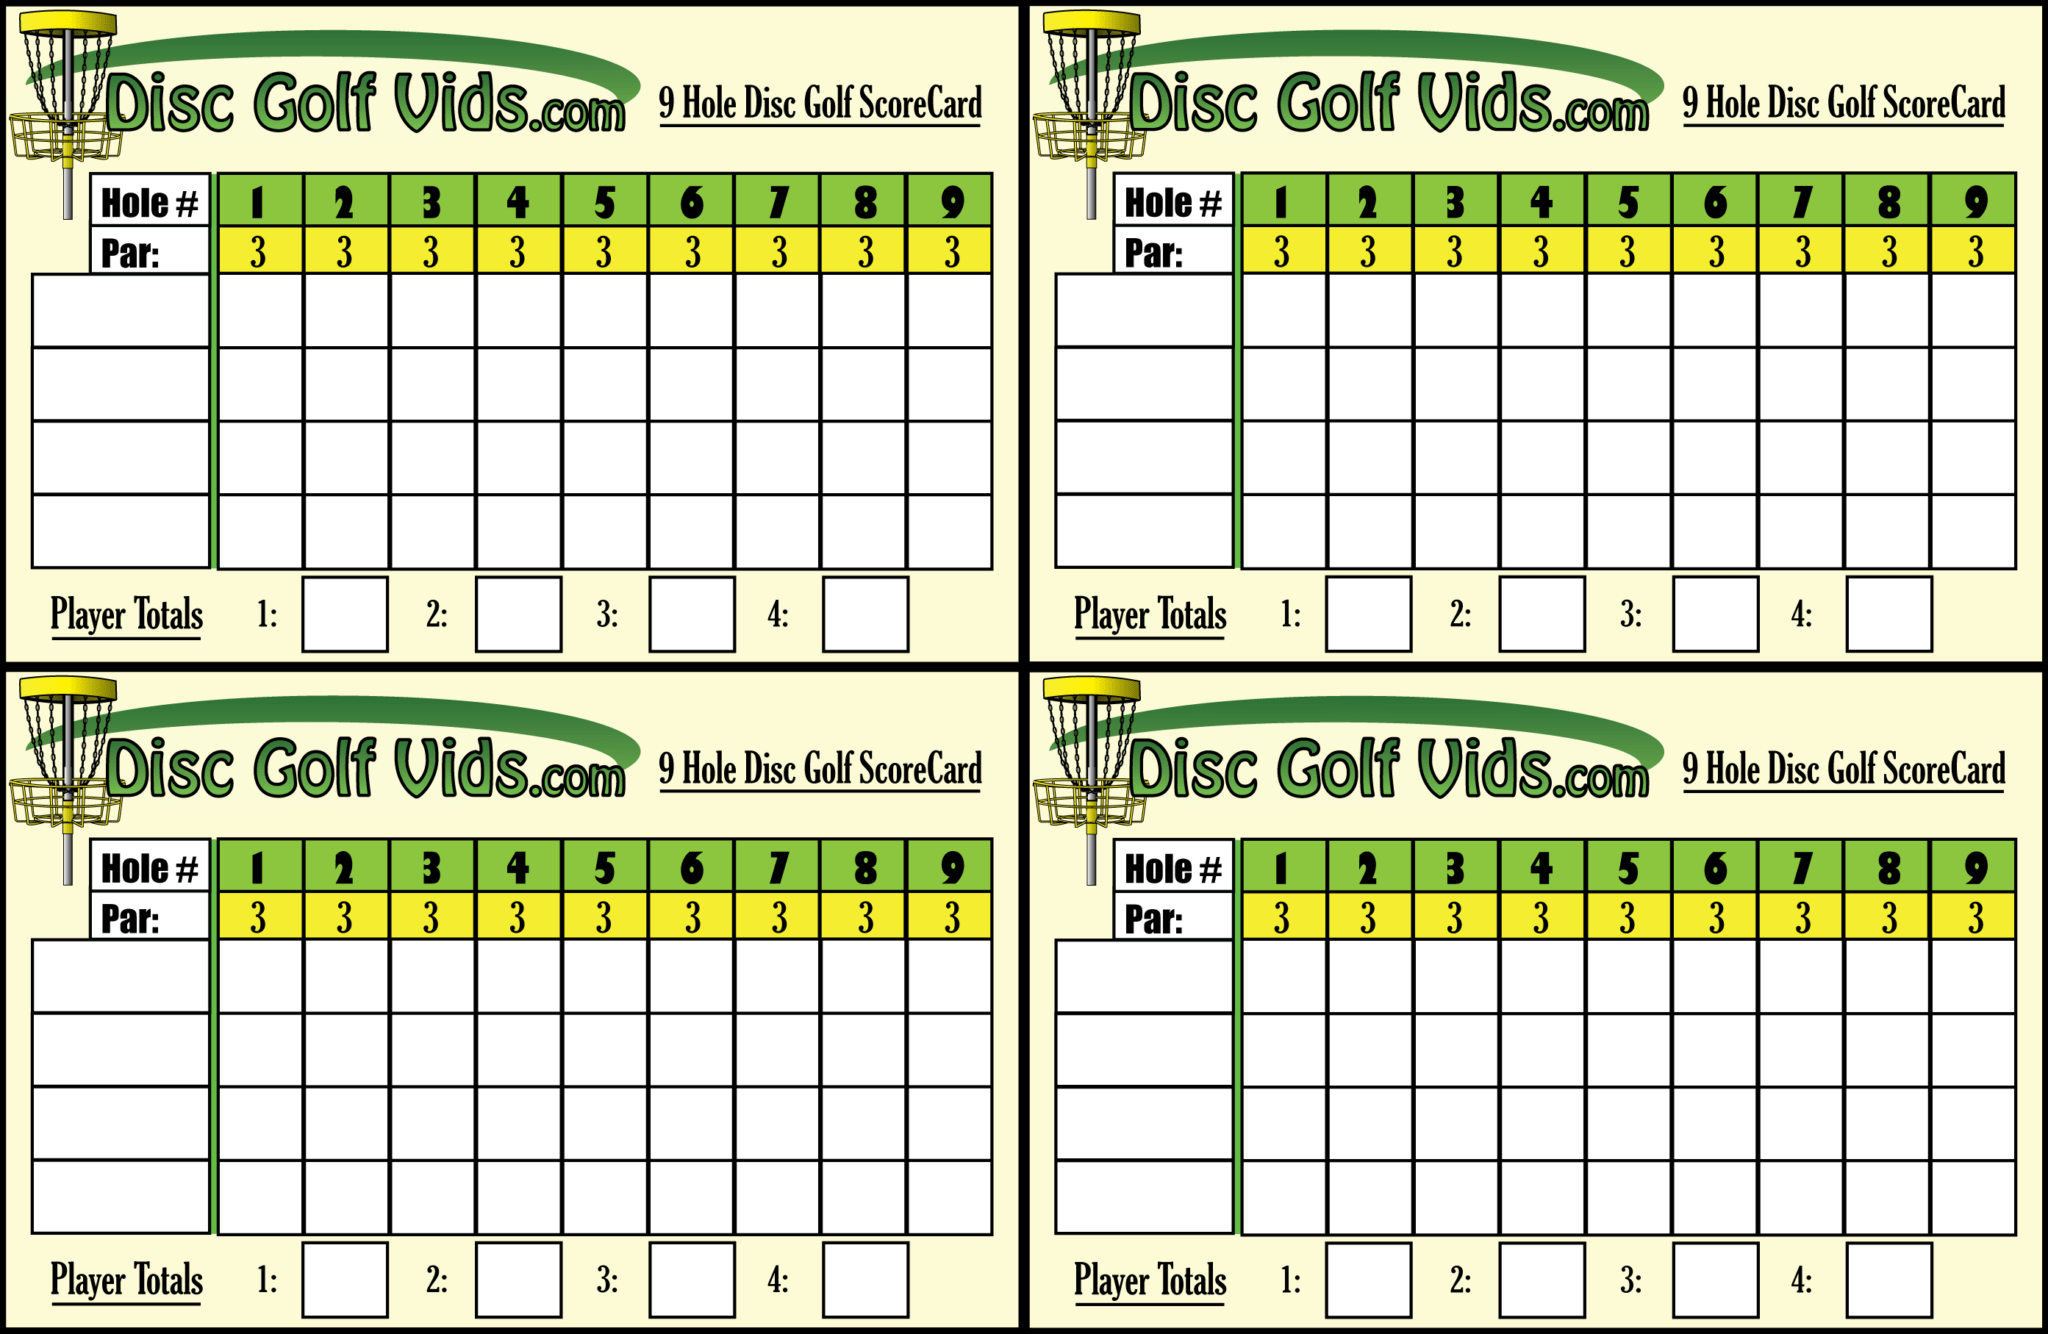 card game golf 9 cards